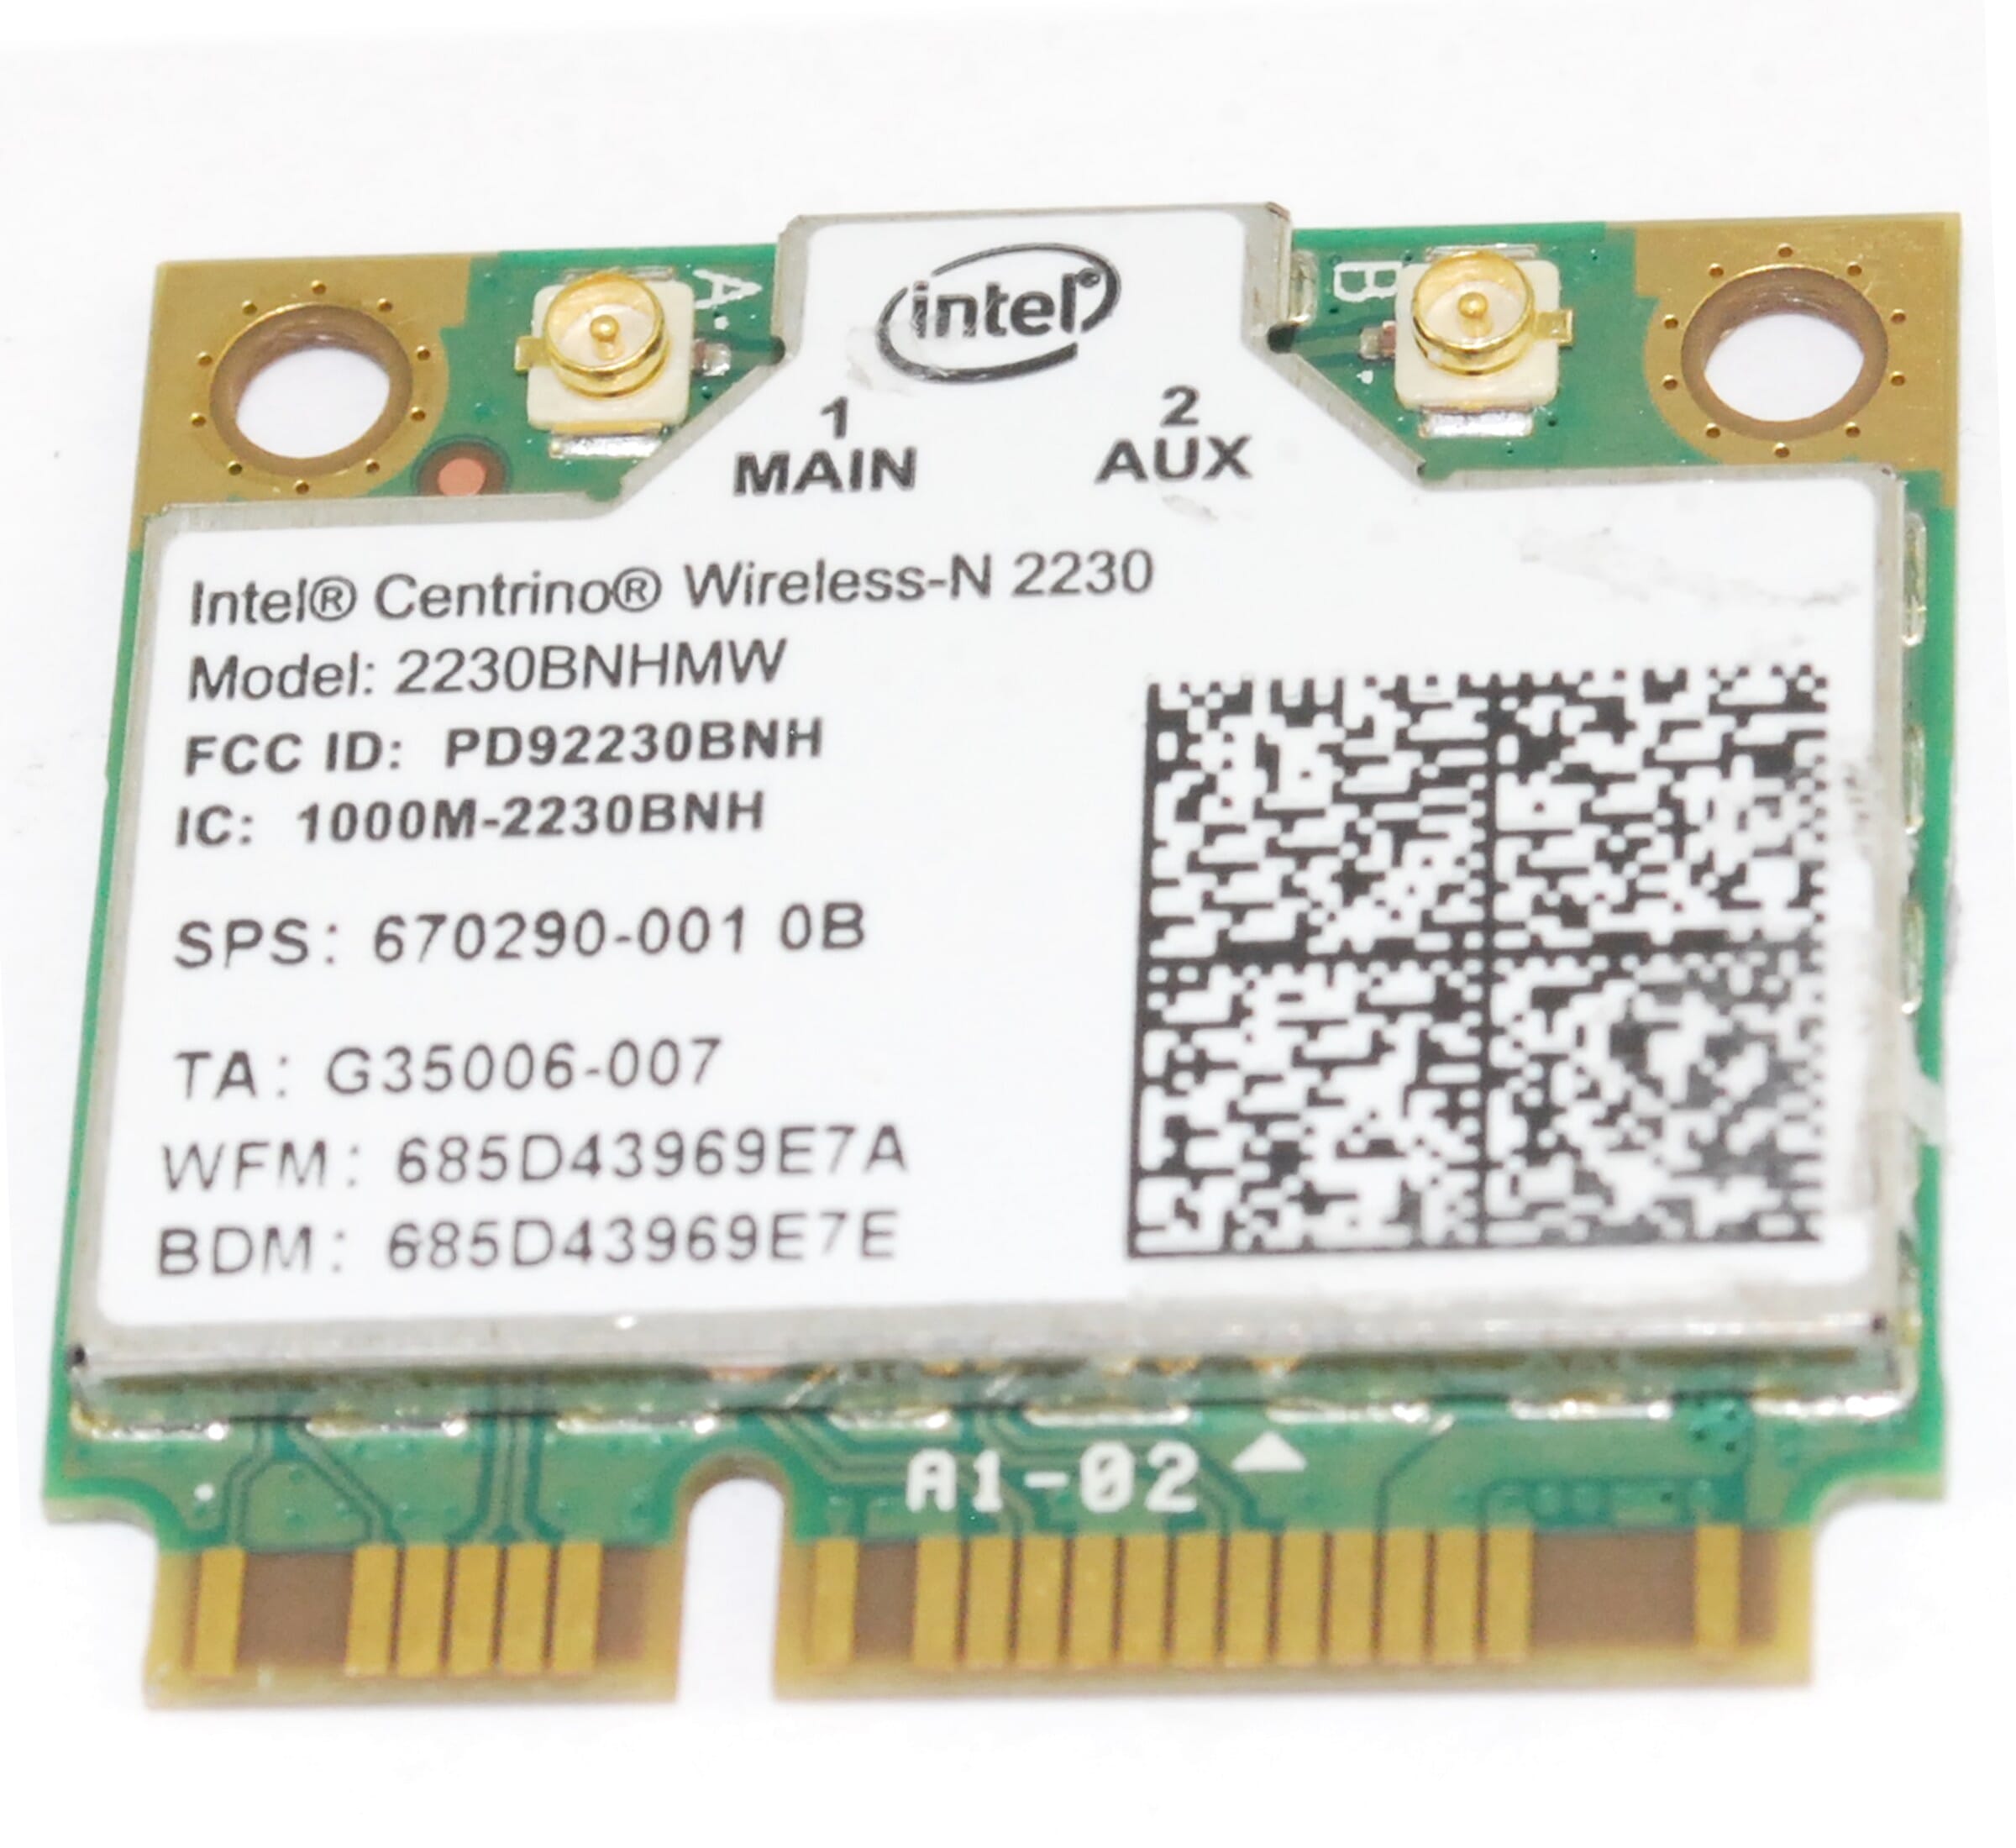 intel centrino wireless n 2230 limited connection